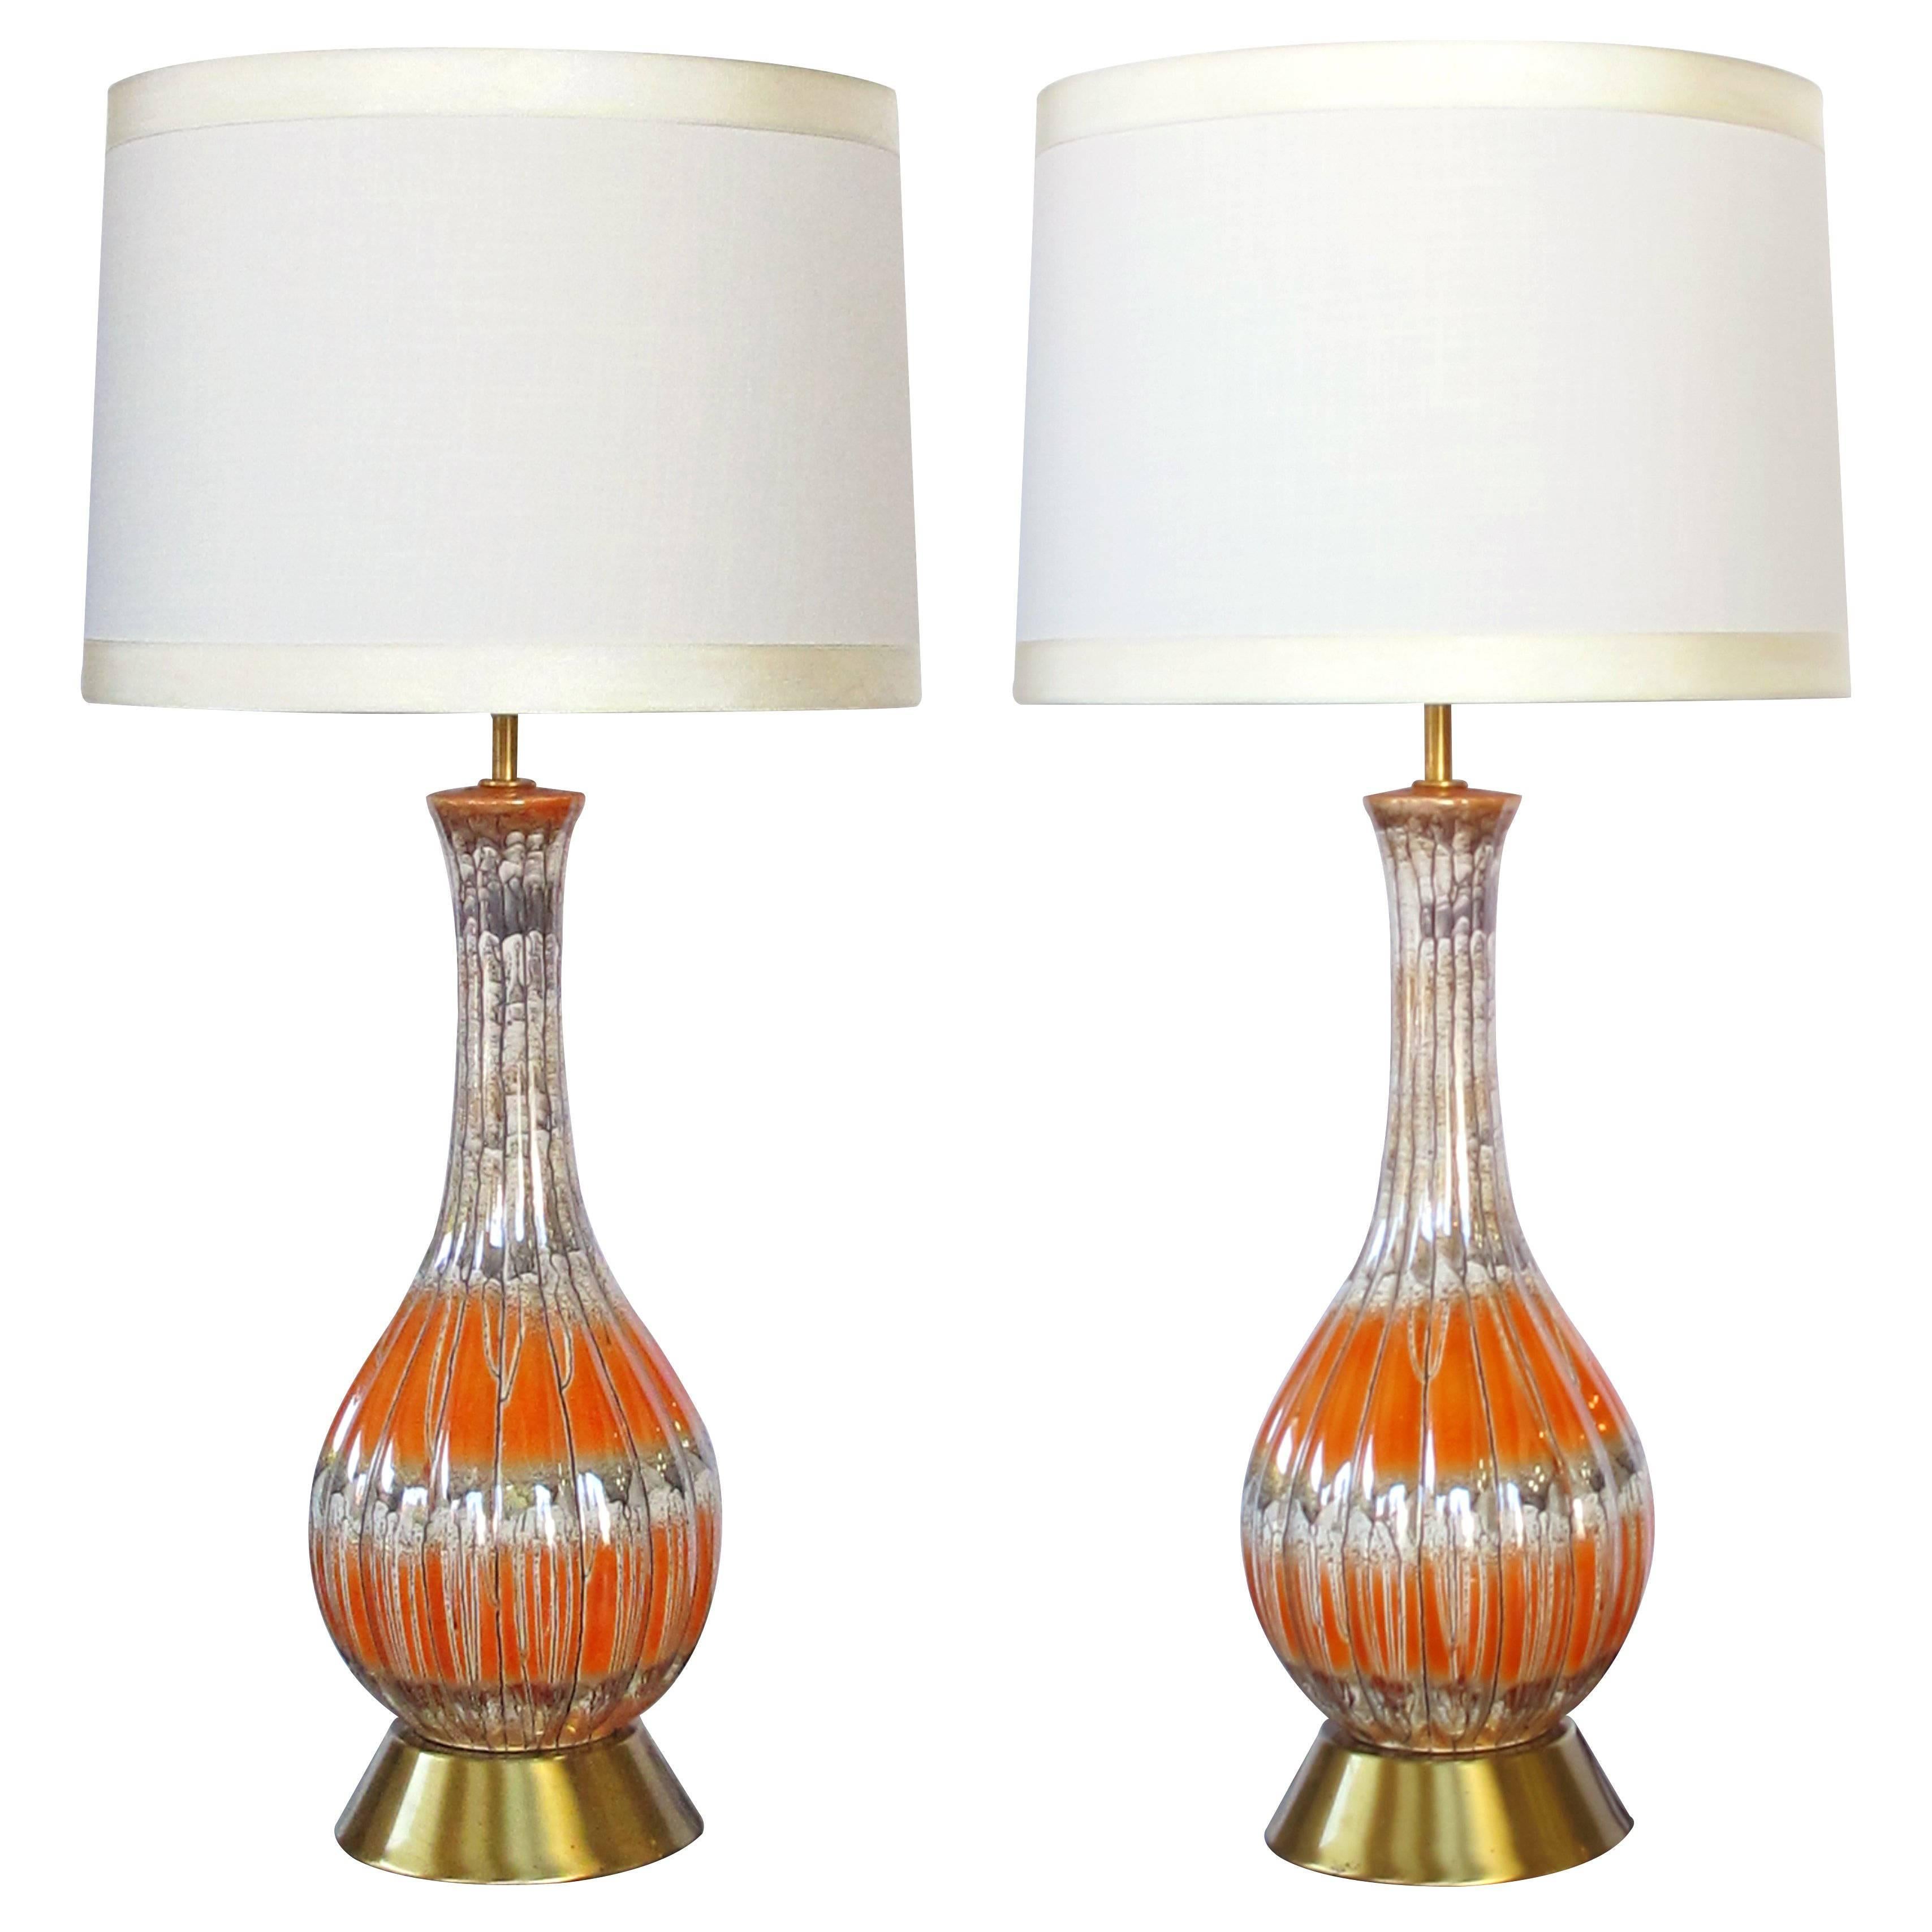 Pair of Mid-Century Bottle-Form Luster-Glazed Ceramic Lamps with Ribbed Body